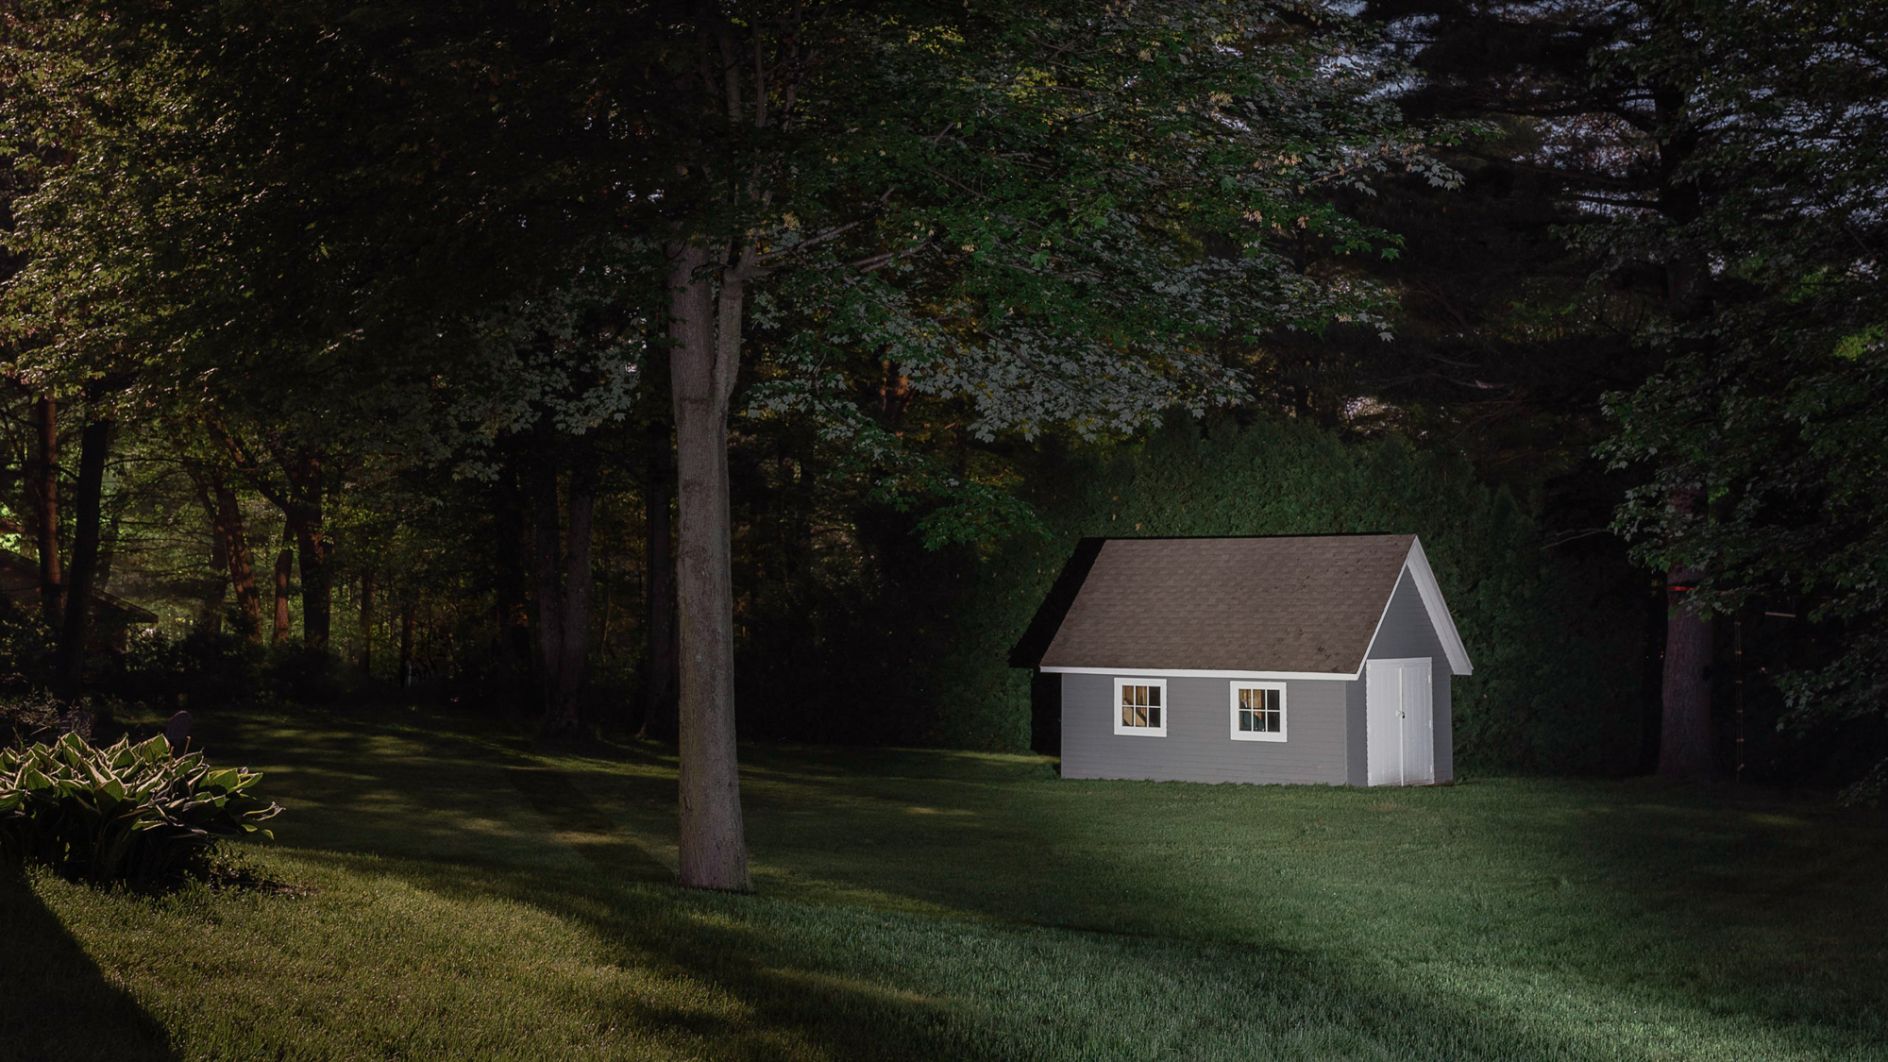 Cinematic photographs of America's rural Midwest at night look like ...